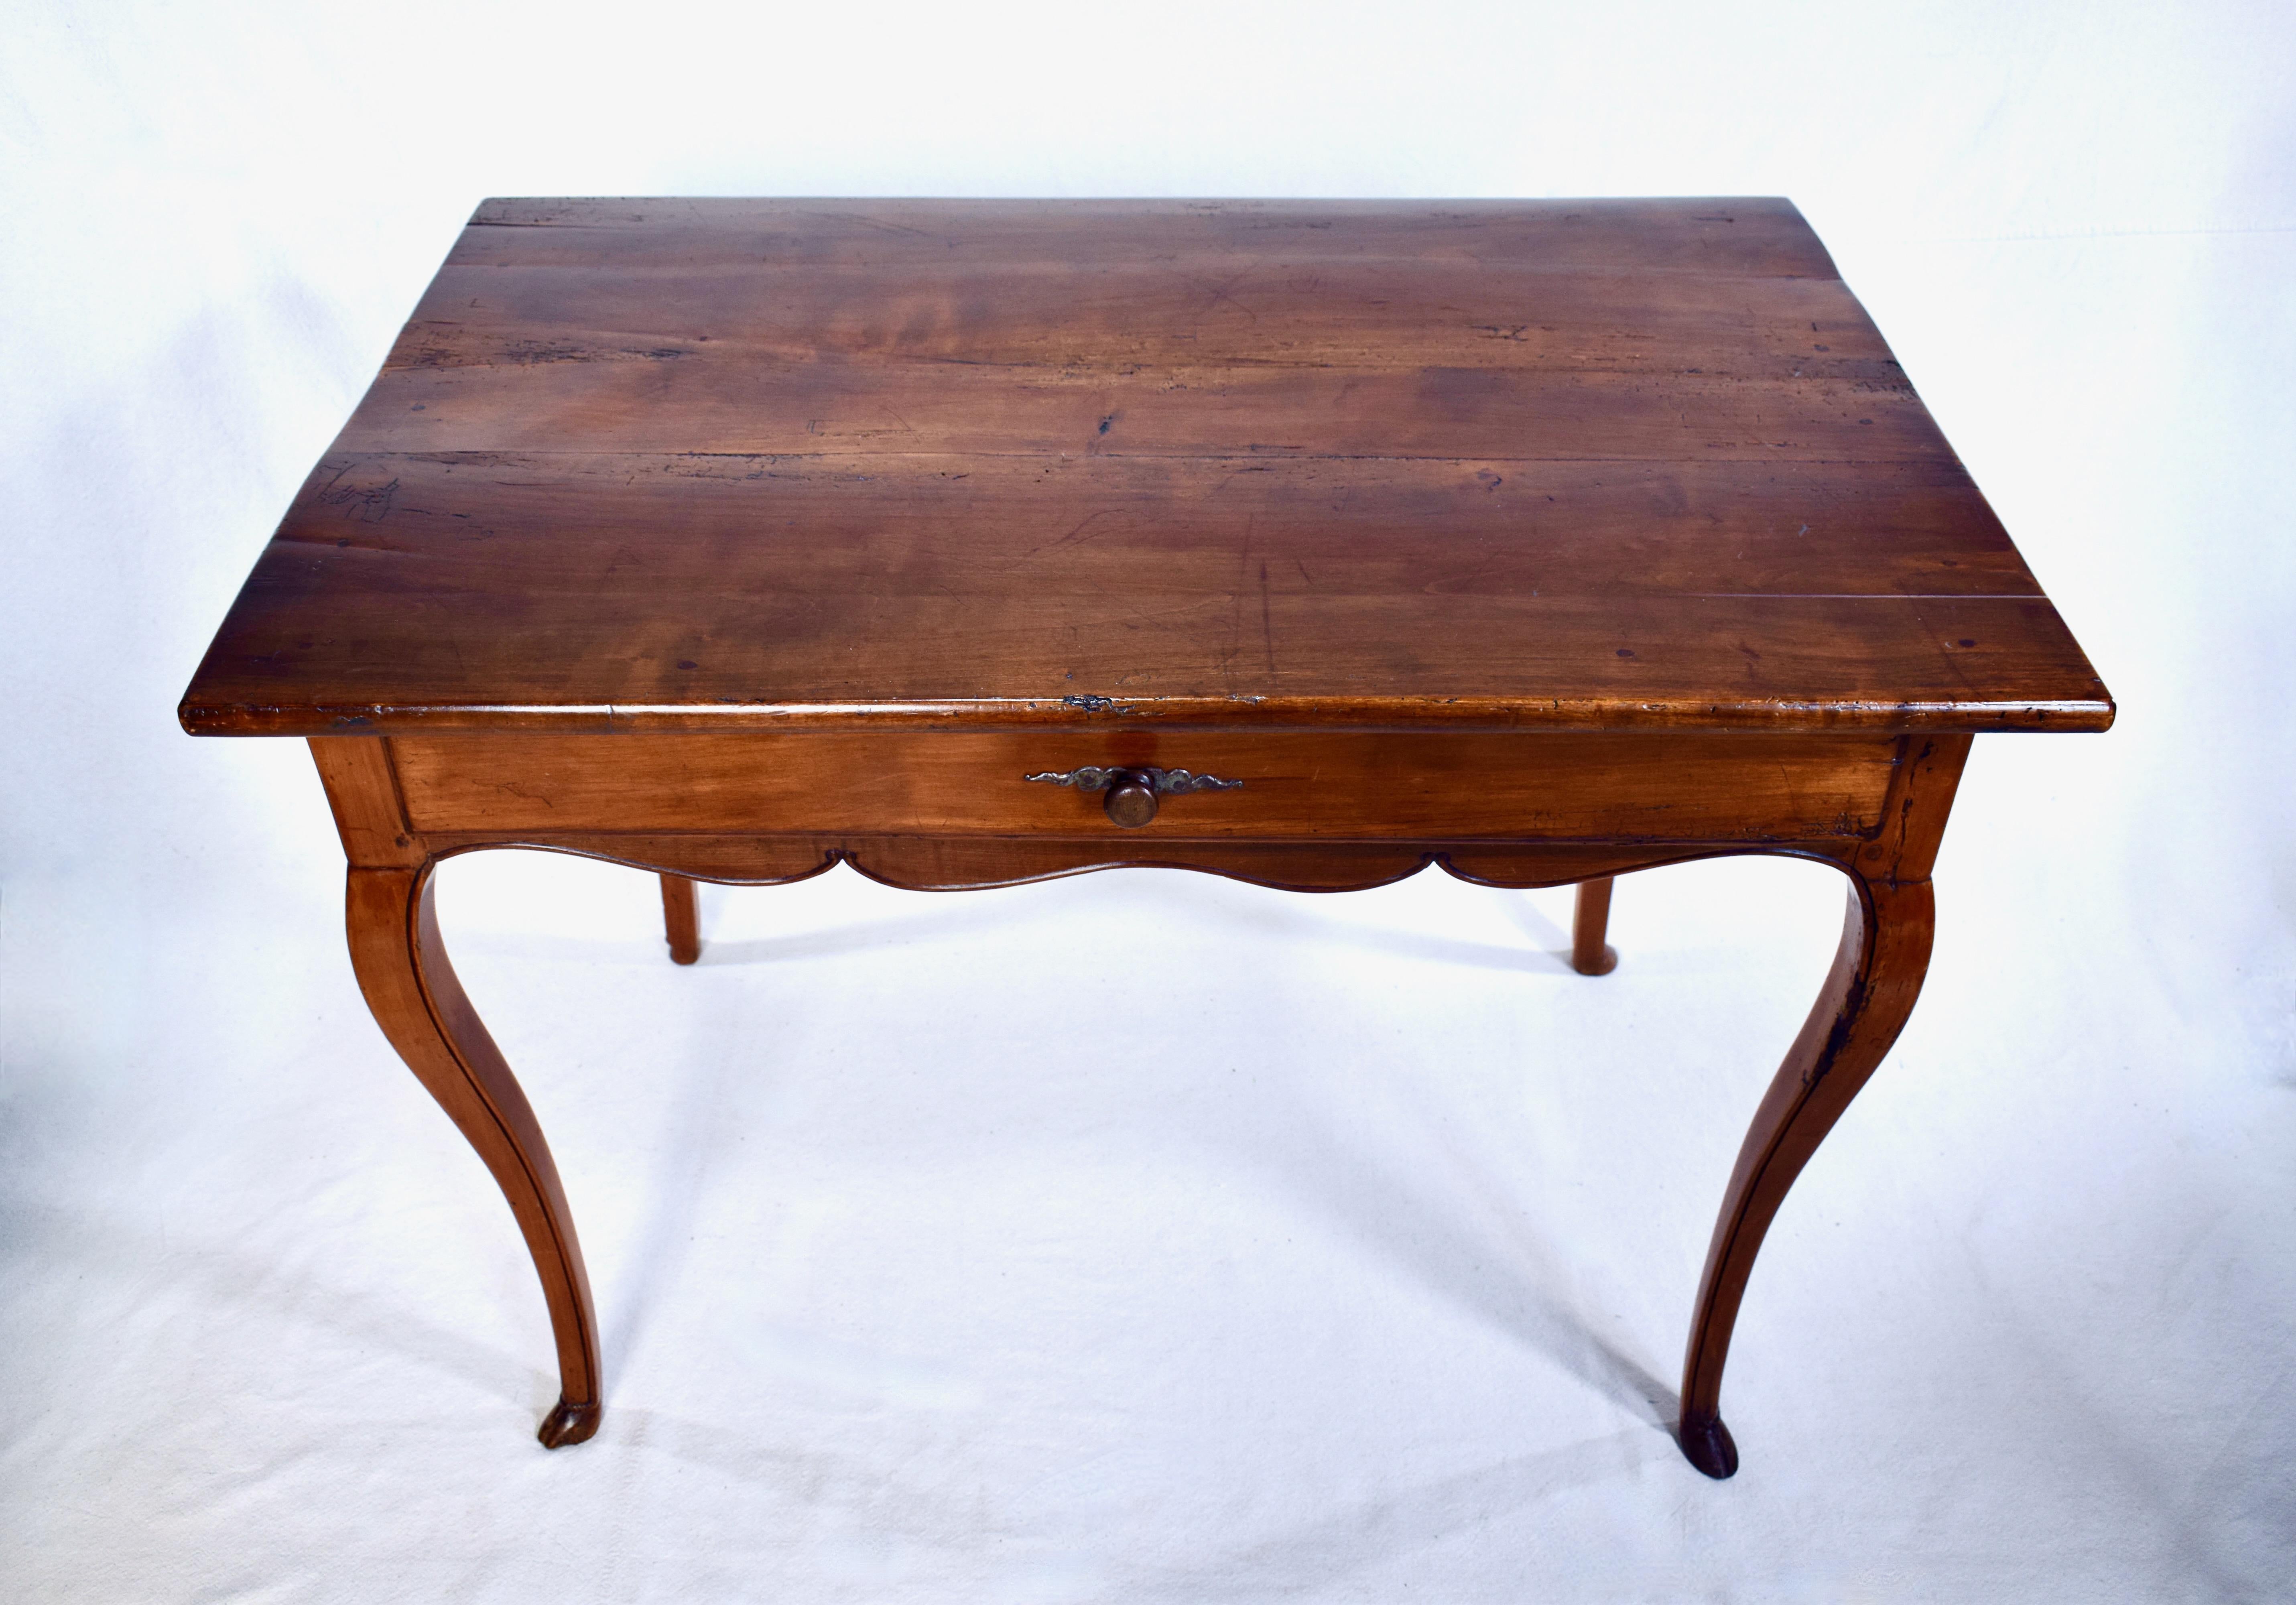 Fine Mid-18th Century French Louis XV period petit ladies desk or side table handcrafted in solid French walnut. Features a rectangular top with scalloped apron on all sides and single hand dovetailed drawer. Raised on four graceful cabriole legs